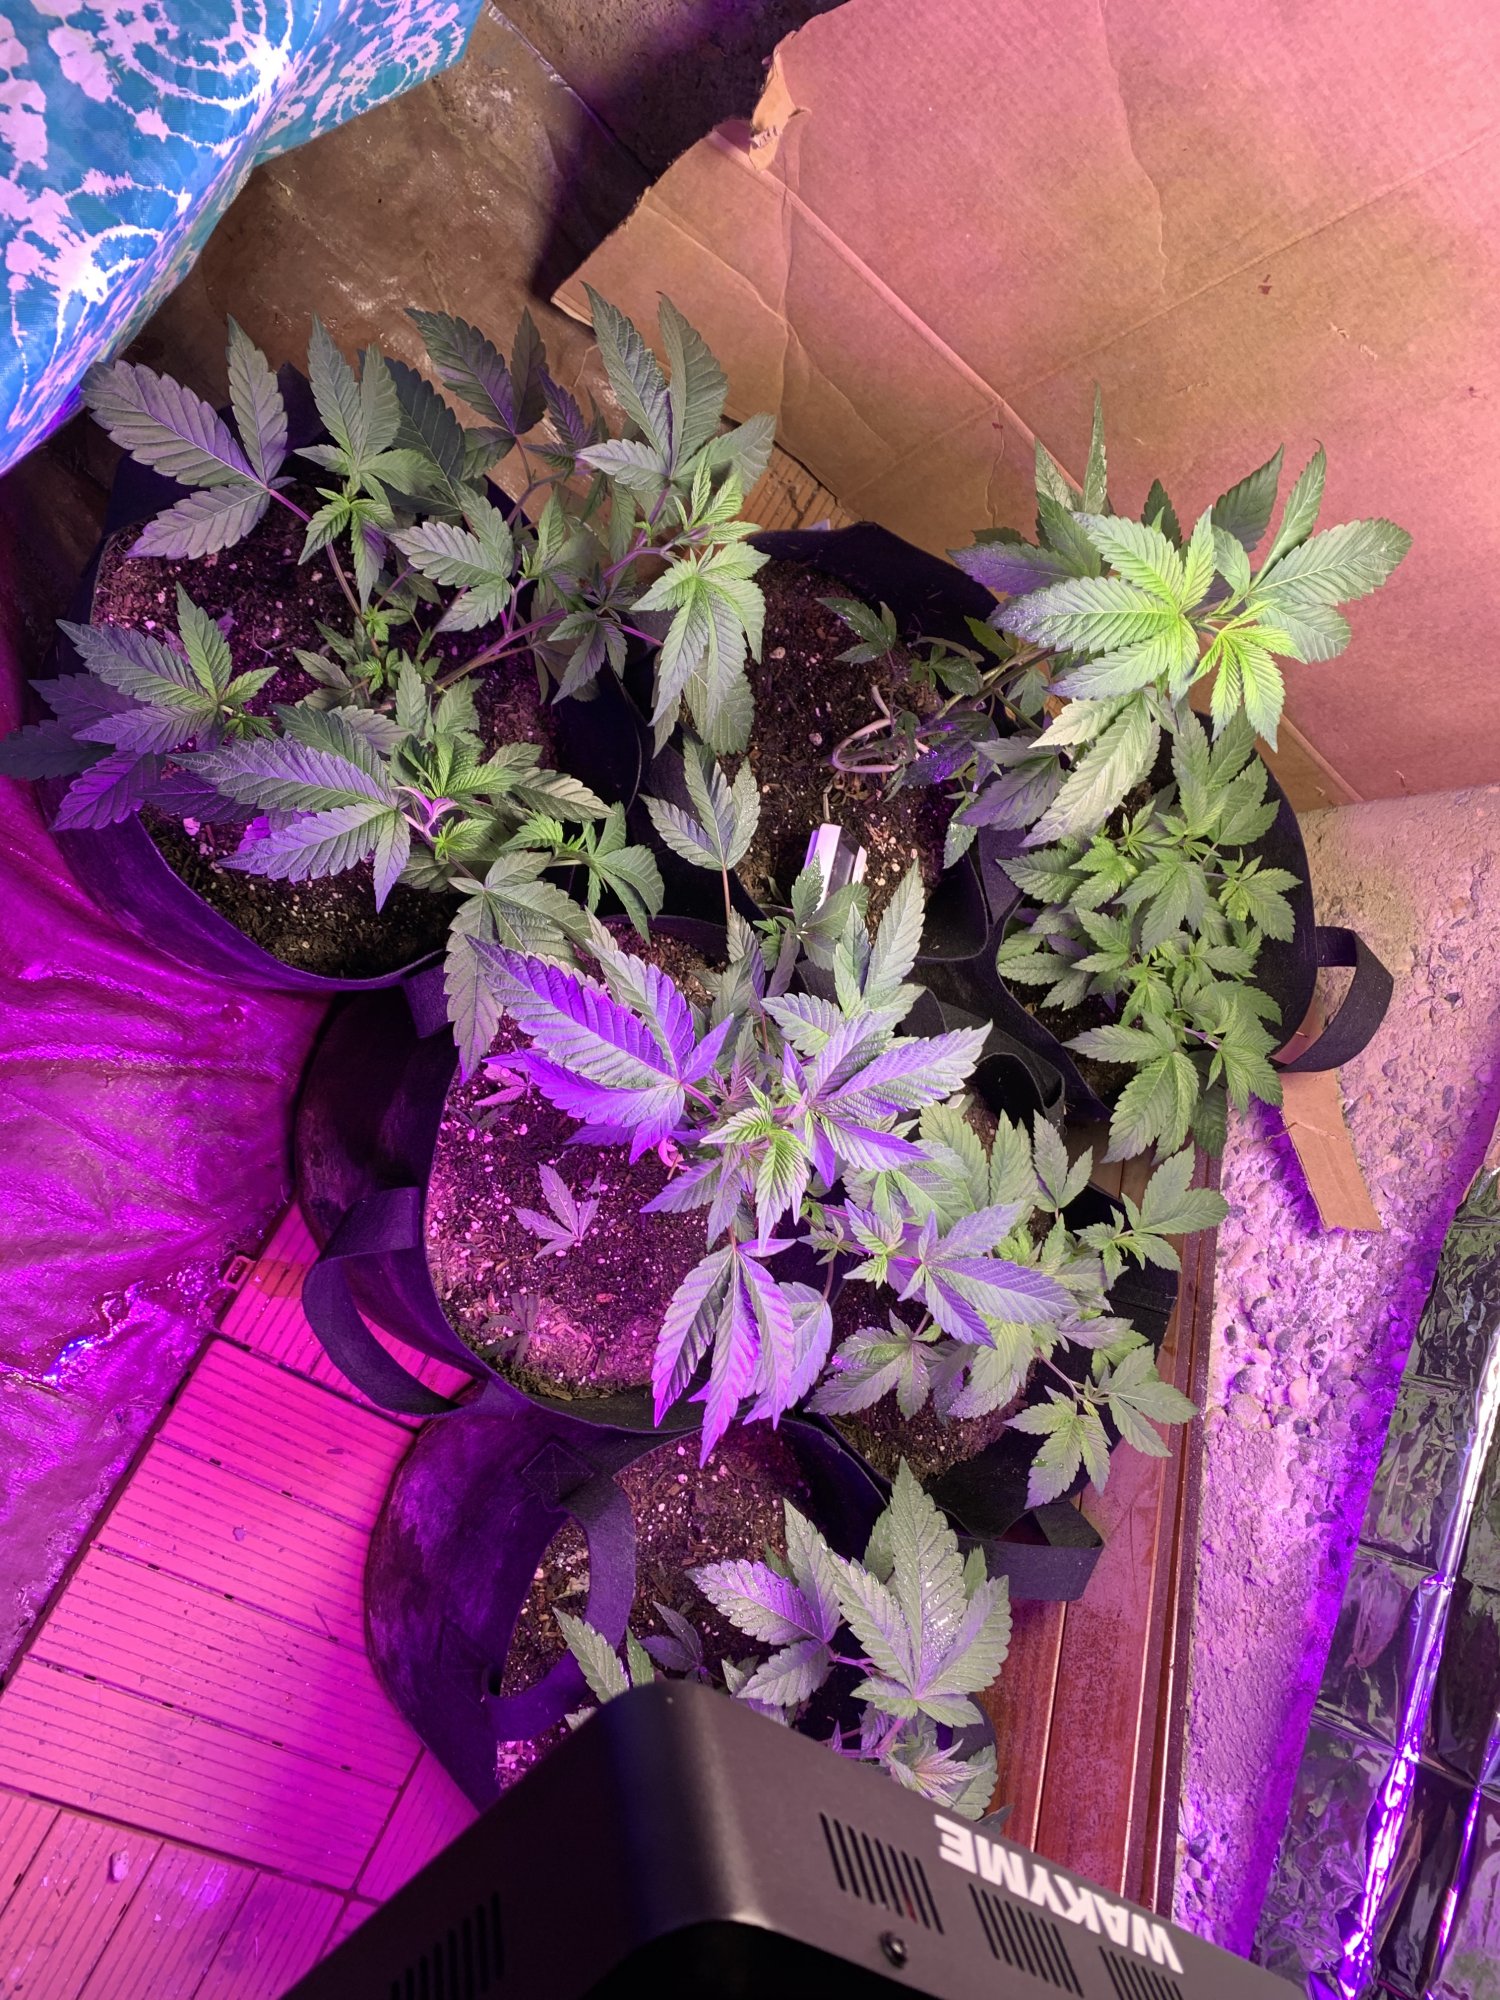 66 days first indoor learning a lot 2